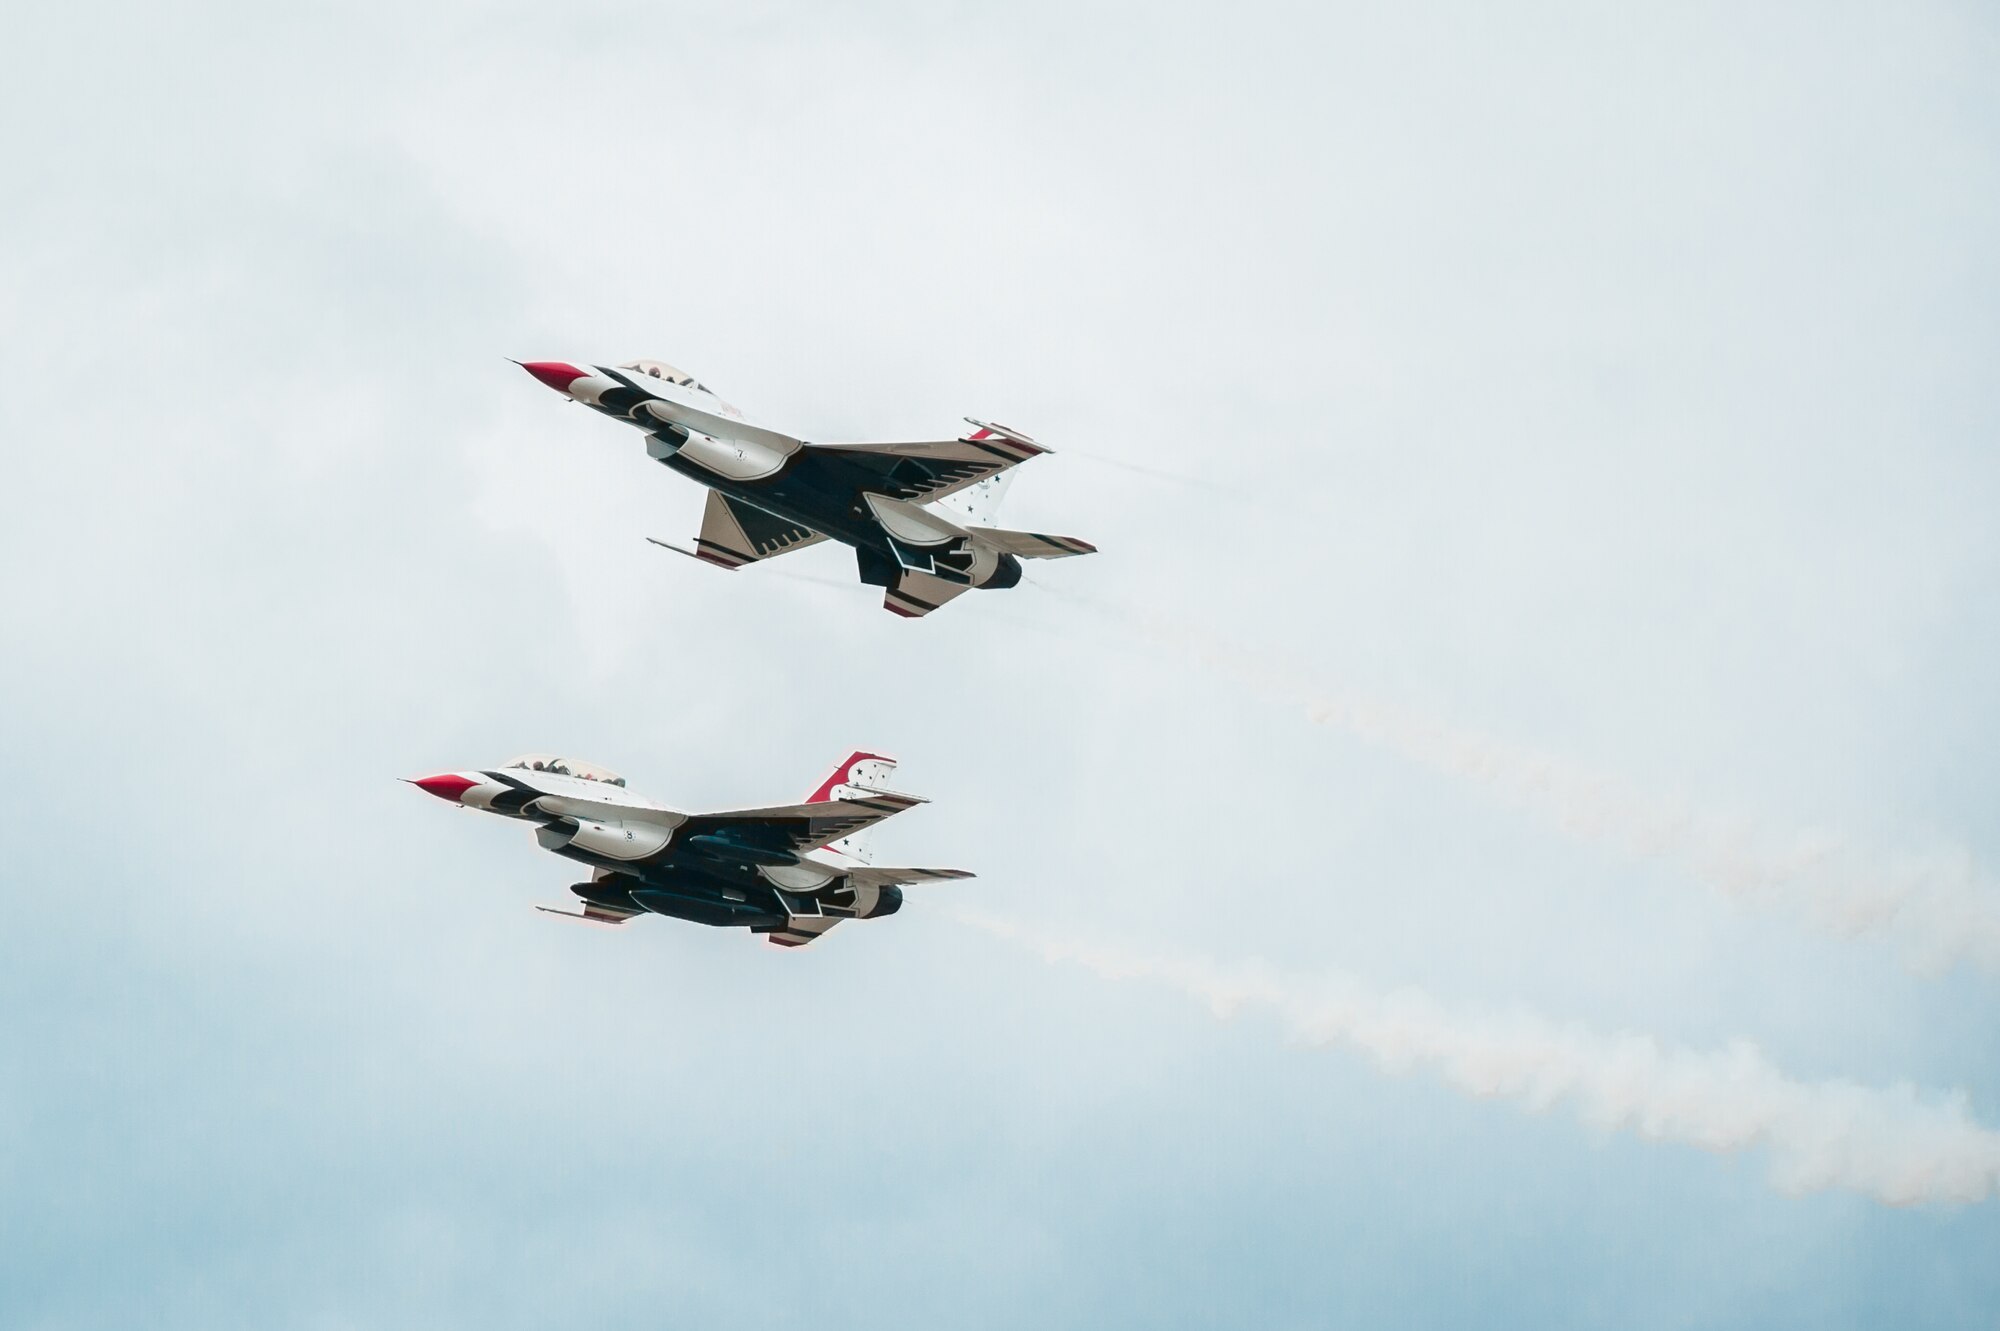 Members of the U.S. Air Force Thunderbirds aerial demonstration squadron fly over the Kentucky Air National Guard Base in Louisville, Ky., April 16, 2015, prior to landing. The Thunderbirds are performing in the 2015 Thunder Over Louisville air show, to be held April 18 over the Ohio River in downtown Louisville. The Kentucky Air Guard is providing logistical support to military aircraft flying in the air show. (U.S. Air National Guard photo by Maj. Dale Greer)